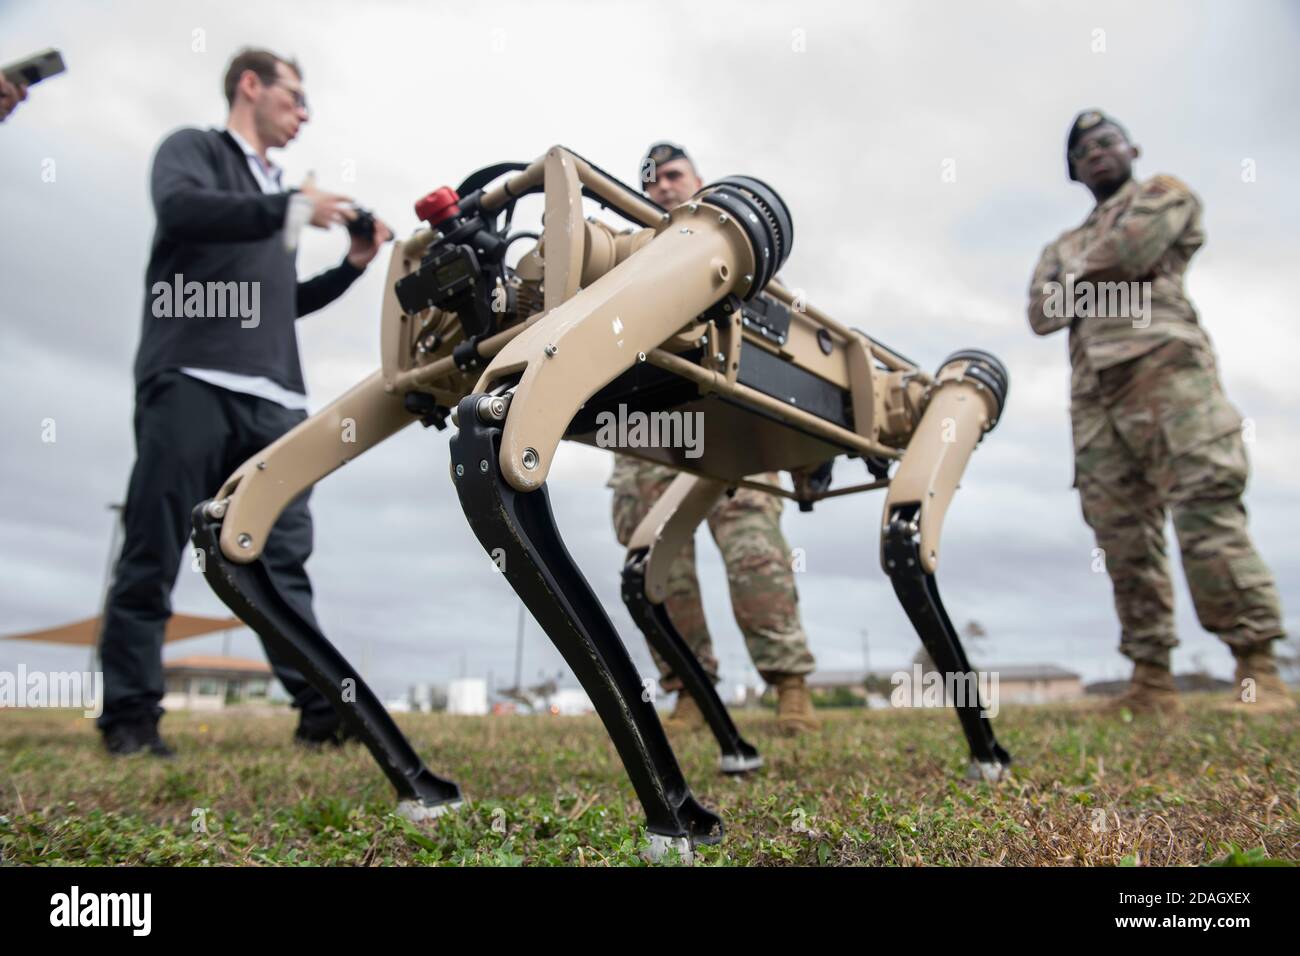 A U.S. Air Force Ghost Q-UGV unmanned ground vehicle known as the robotic dog, is tested at Tyndall Air Force Base November 10, 2020 in Panama City, Florida. Tyndall is one of the first military bases to add the semi-autonomous UGV into their security patrol. Stock Photo